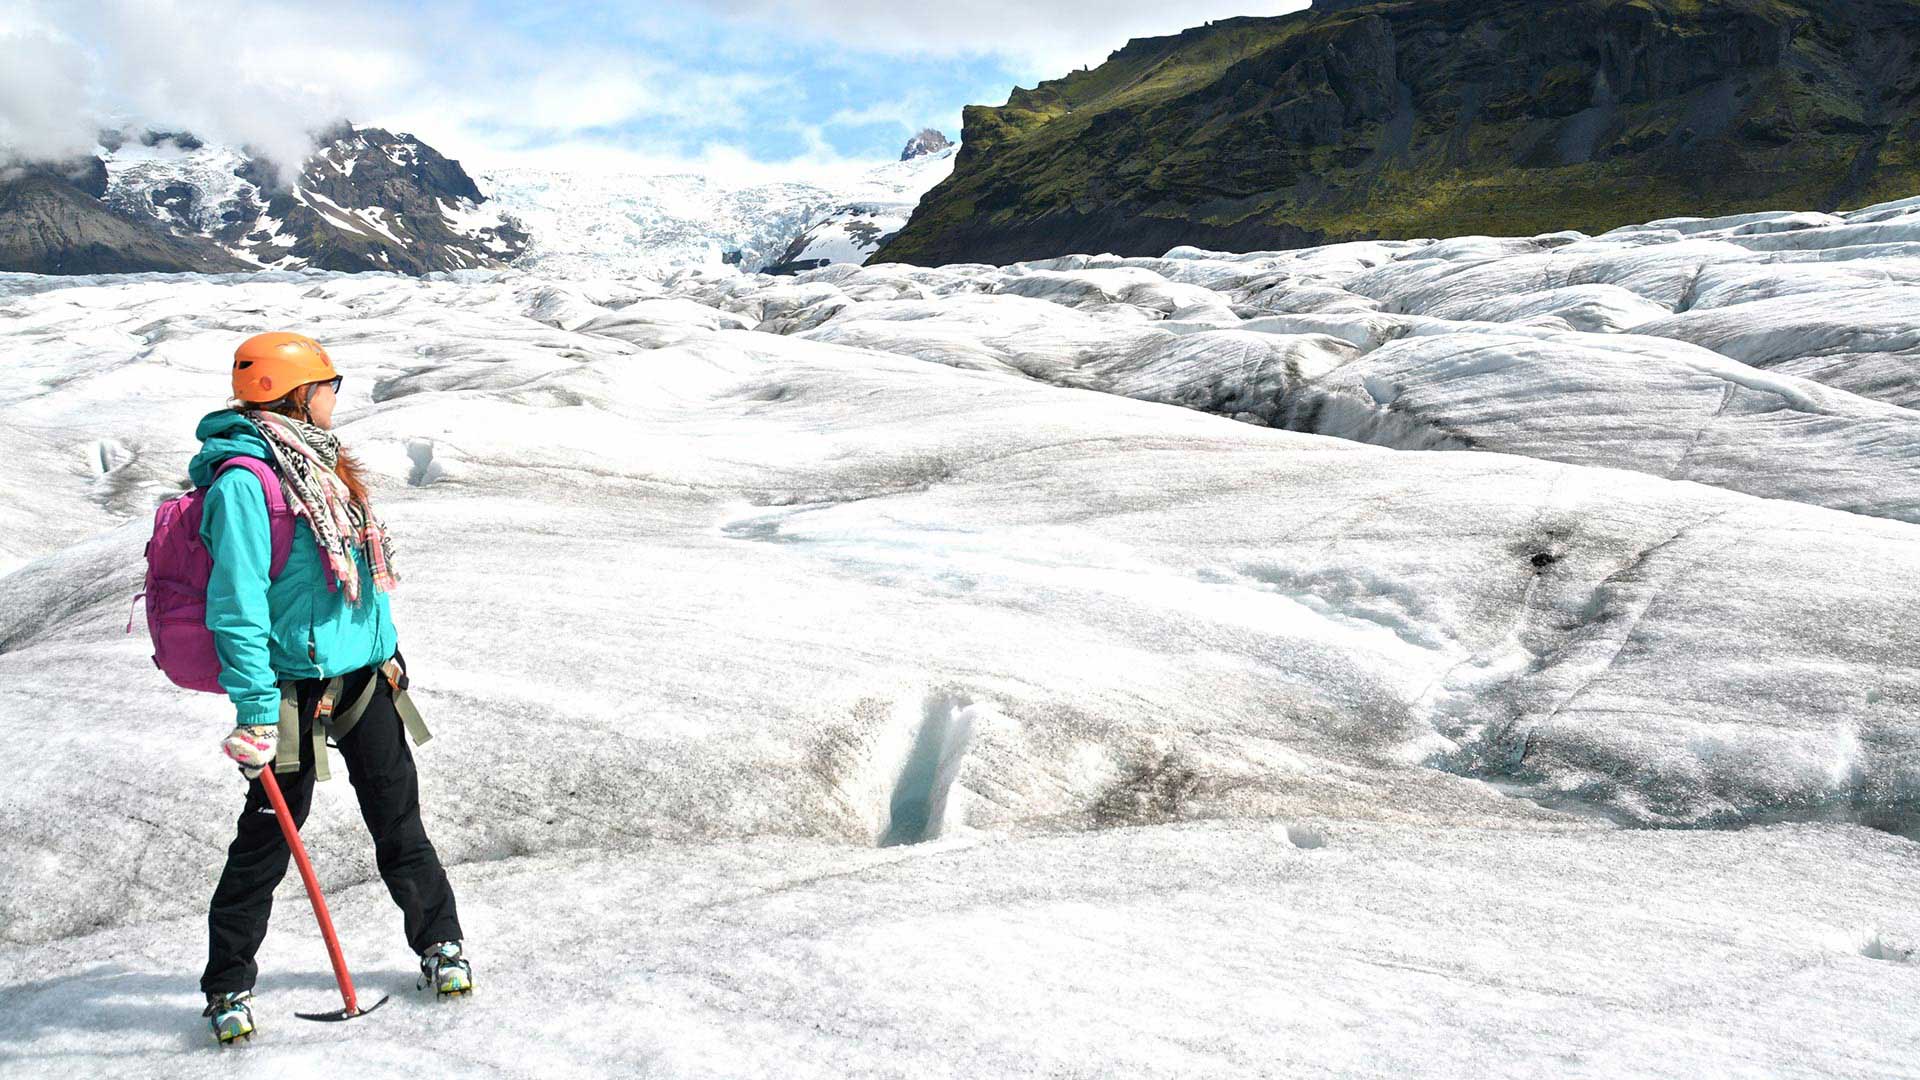 Glacier hiking in Iceland during the summer months